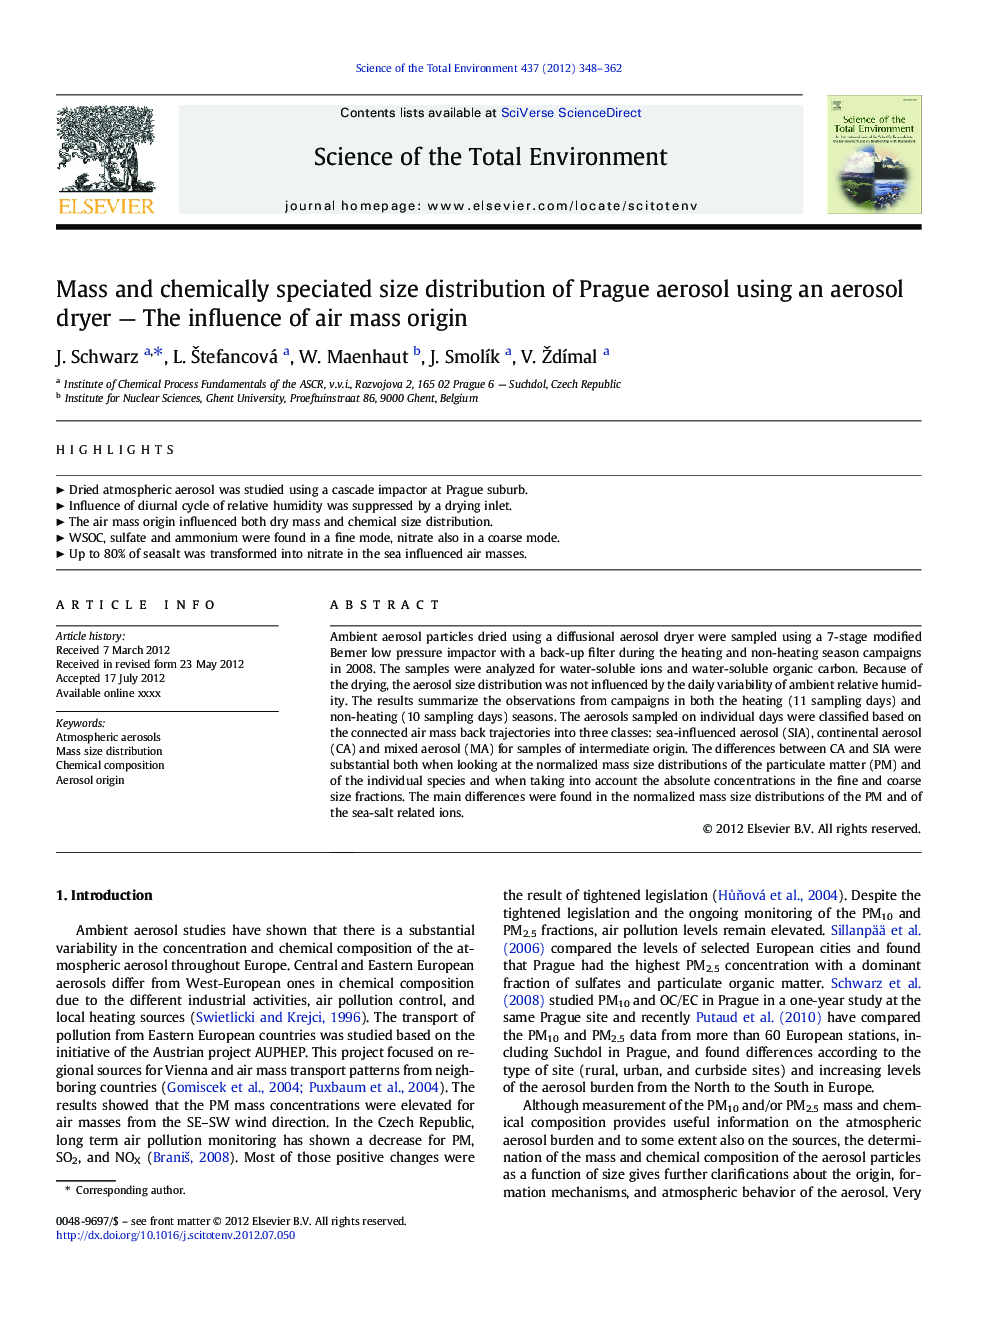 Mass and chemically speciated size distribution of Prague aerosol using an aerosol dryer - The influence of air mass origin